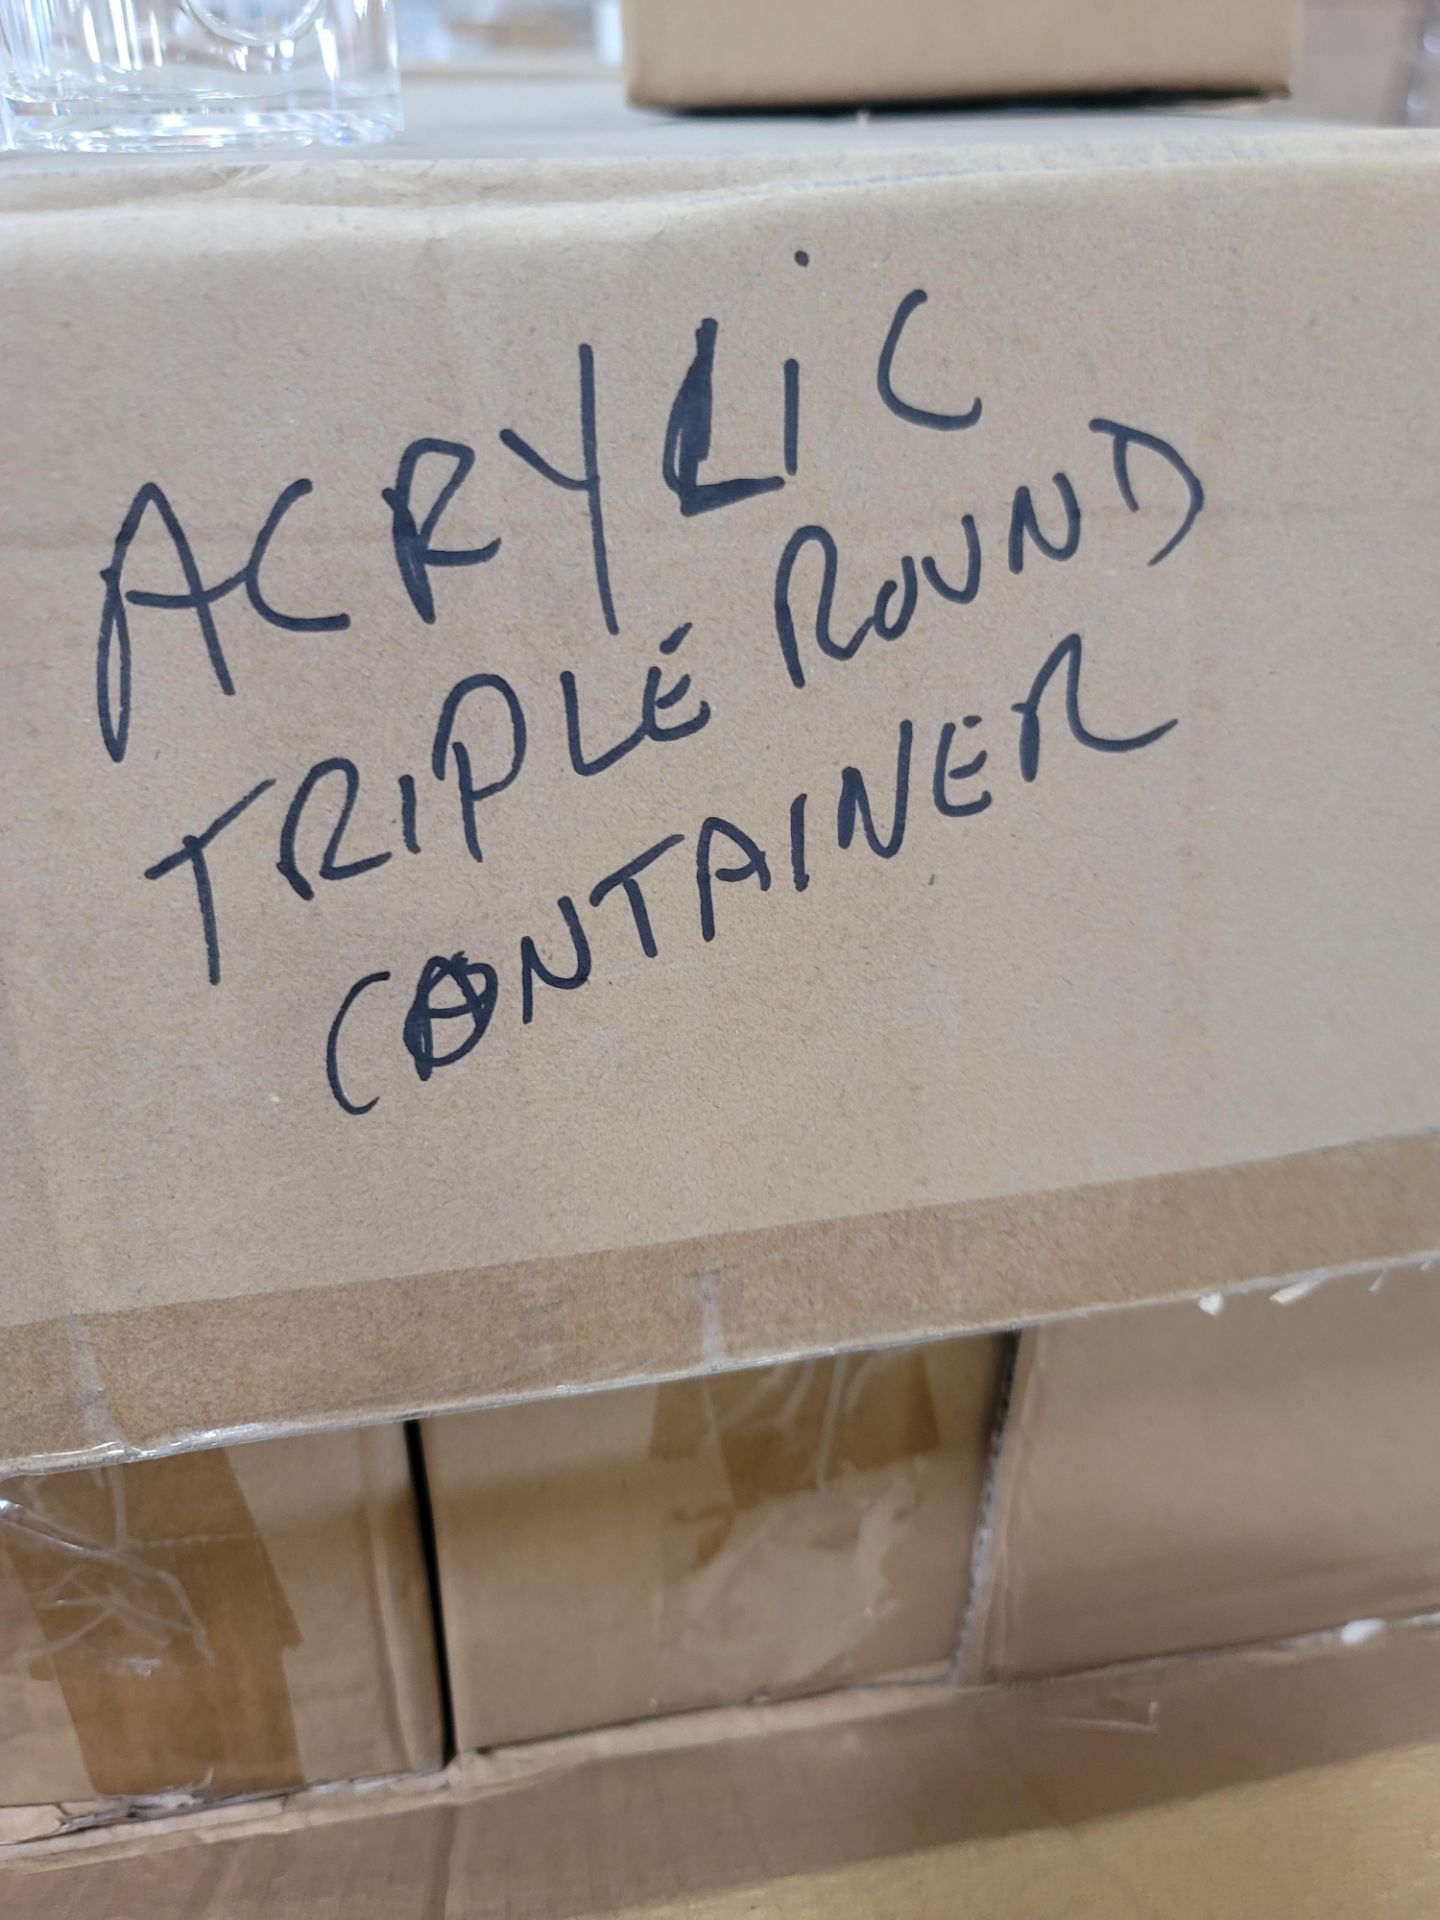 LOT - PALLET OF (288) ACRYLIC TRIPLE ROUND CONTAINER, (12 CASES/24 PER CASE) - Image 2 of 5